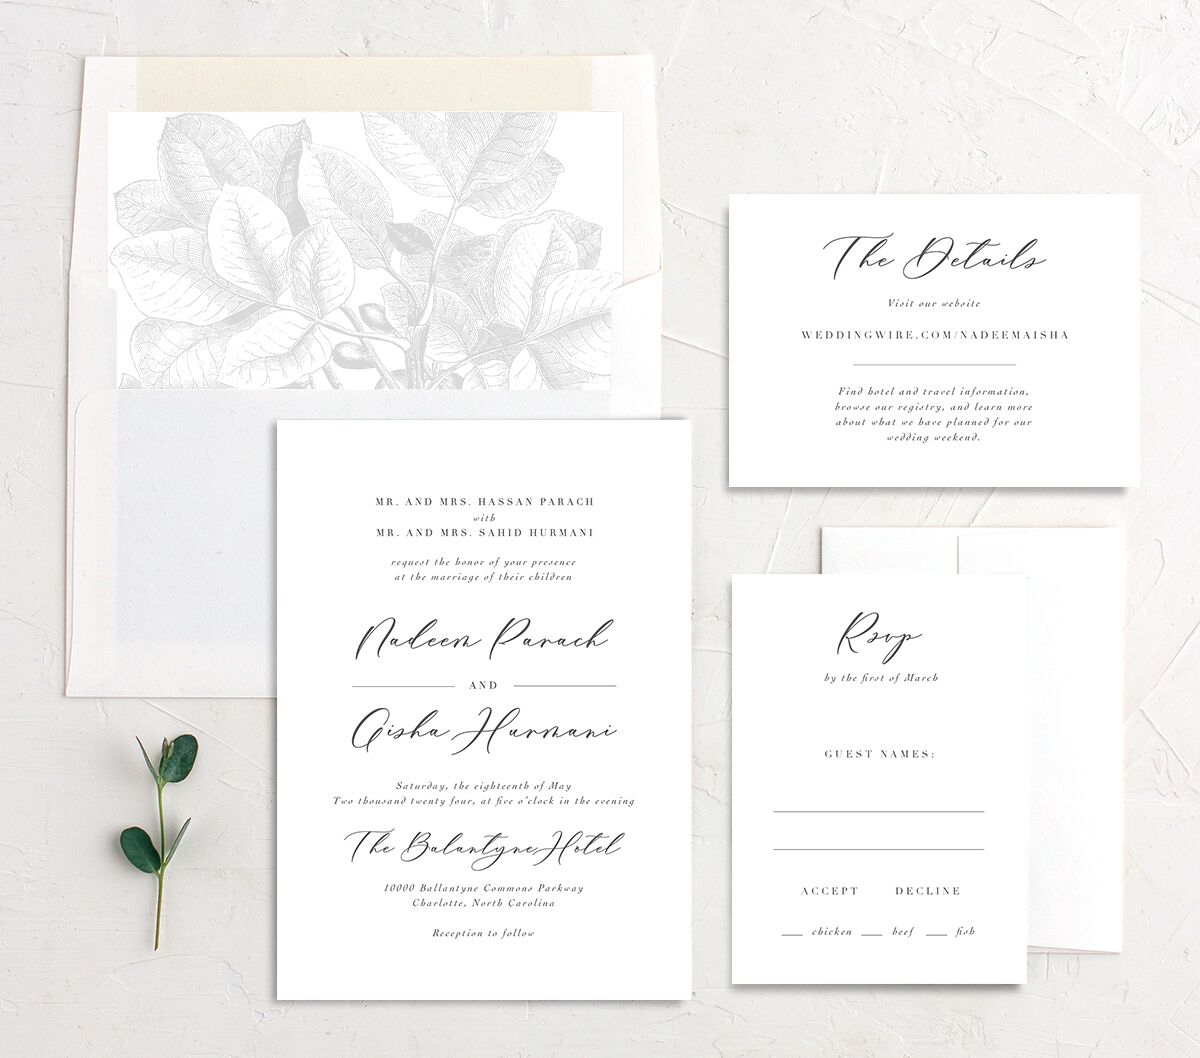 Chic Calligraphy Wedding Invitations suite in Medieval Grey